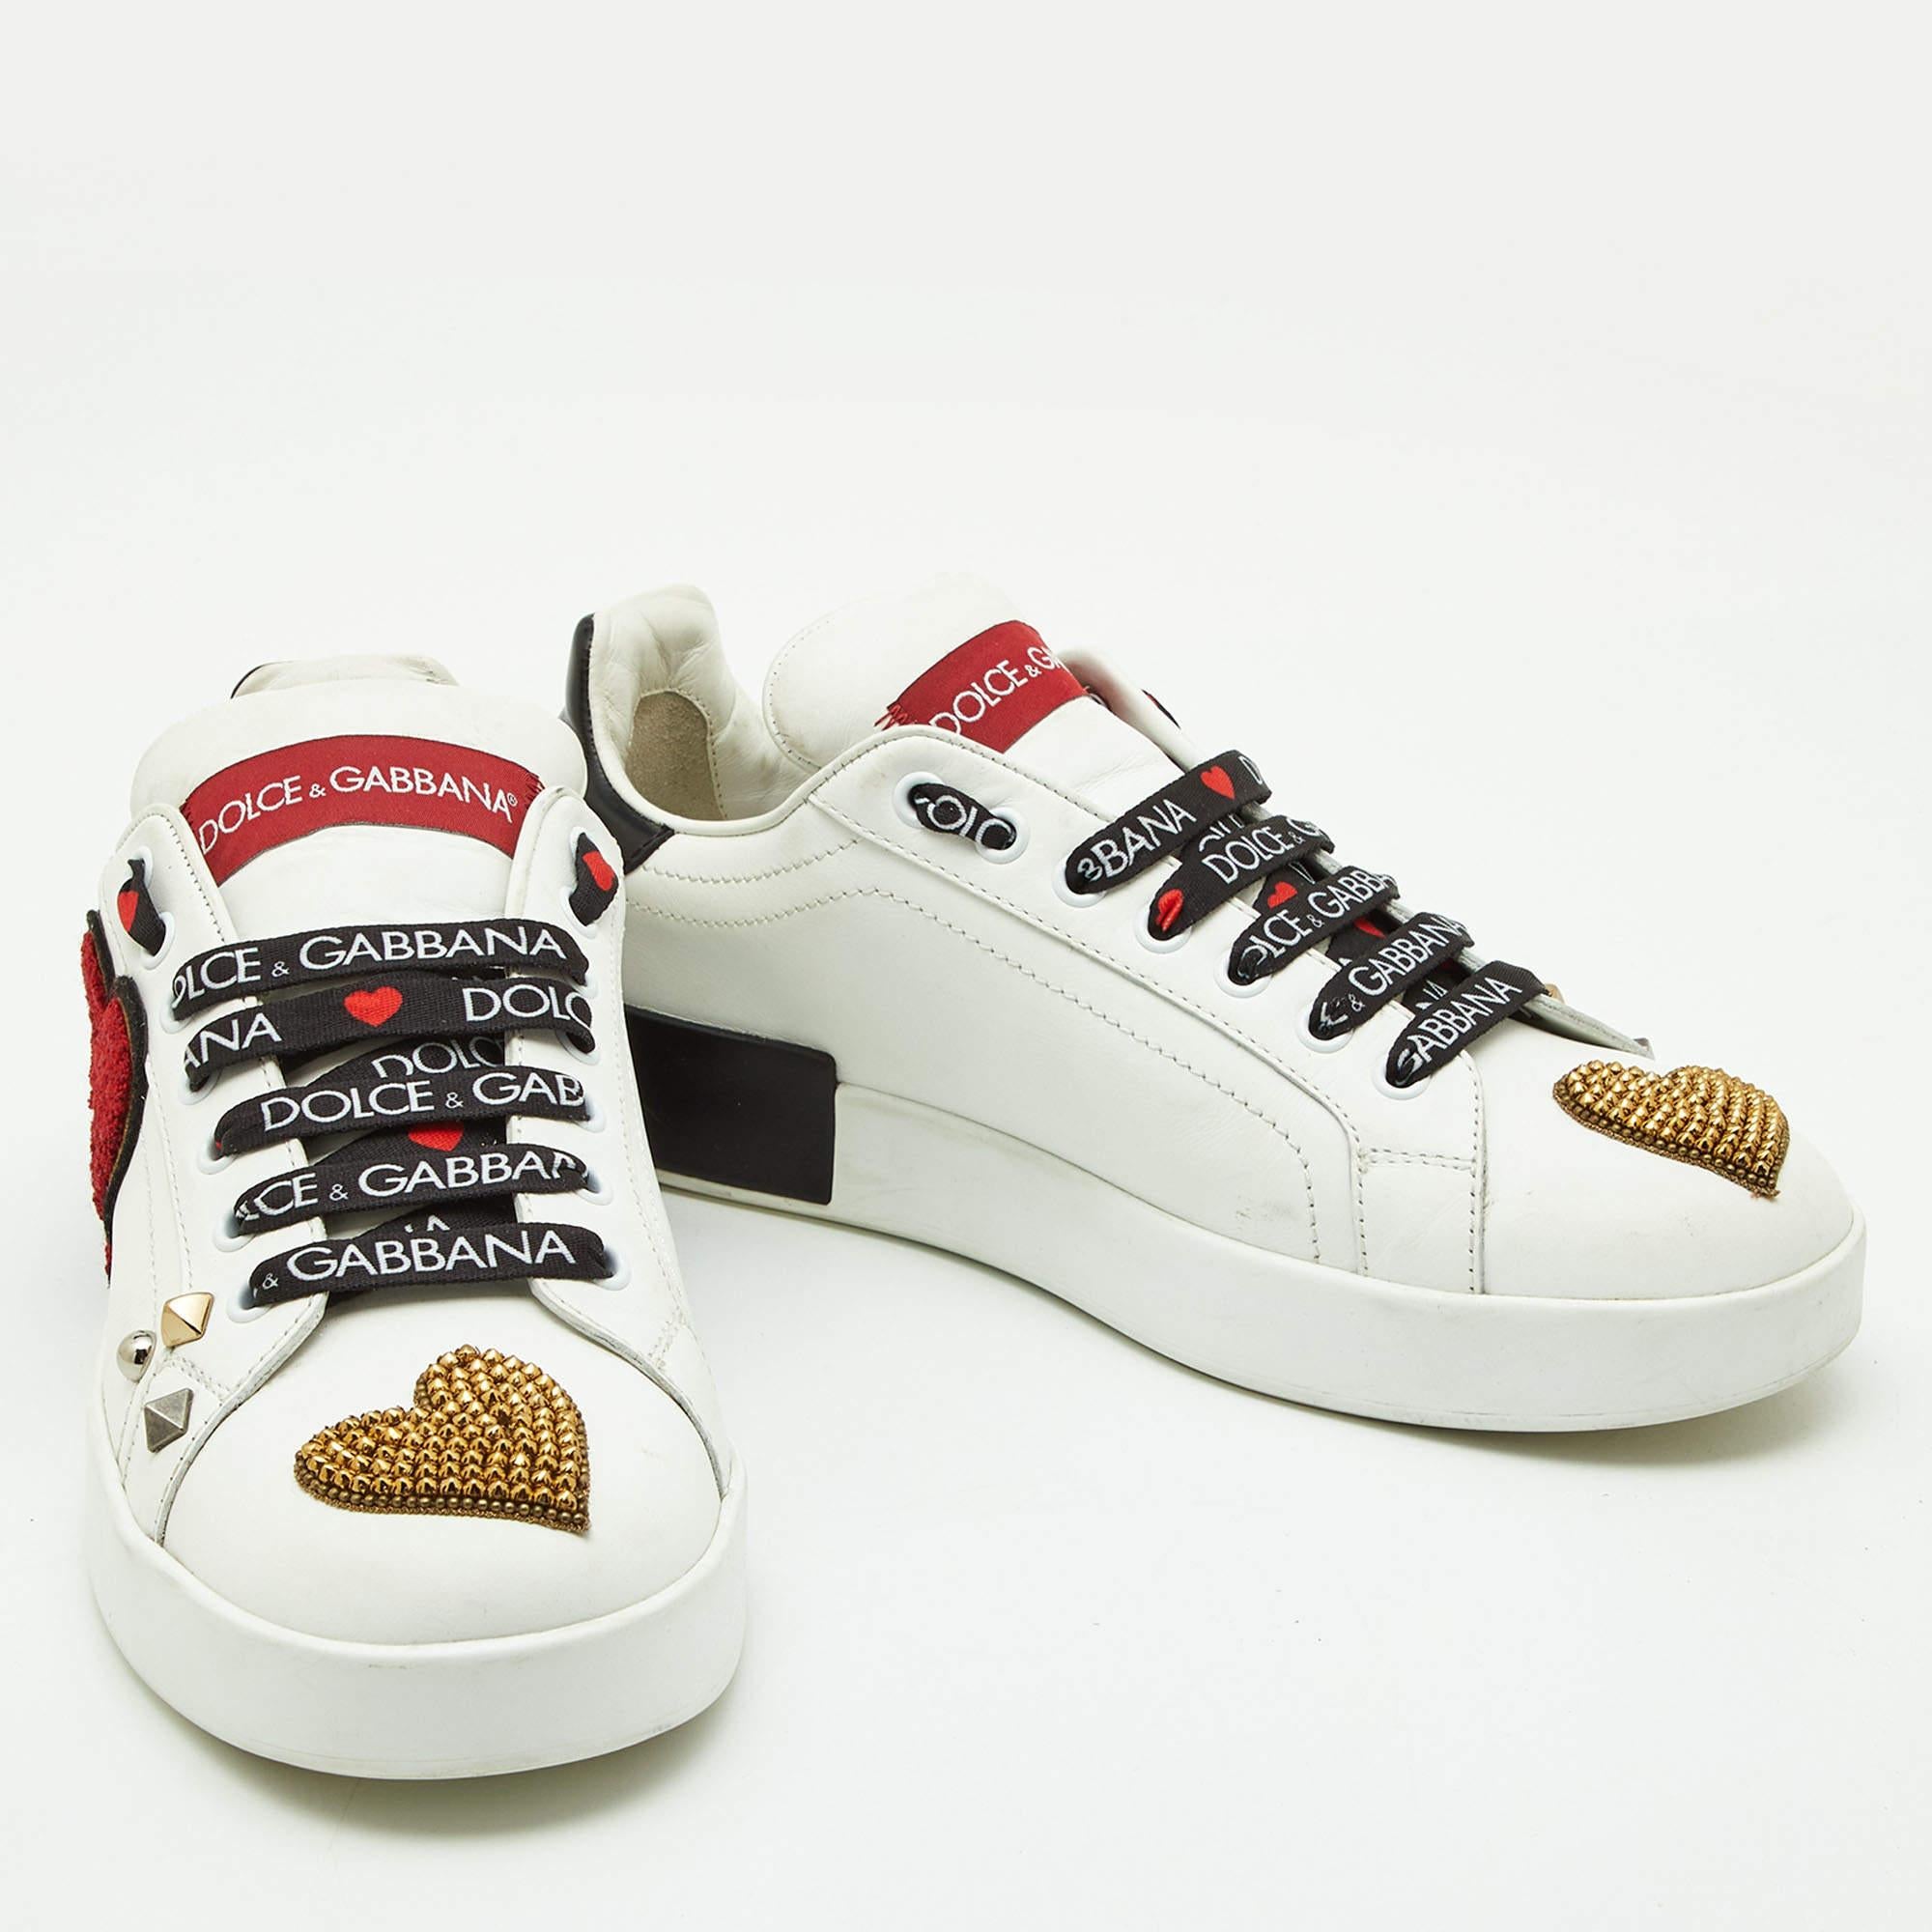 Embark upon a new fashionable adventure as you wear these Portofino sneakers from Dolce & Gabbana. They are crafted from white leather on the upper with an embellished heart-shaped crest fixed on the side. In addition, they are further accentuated